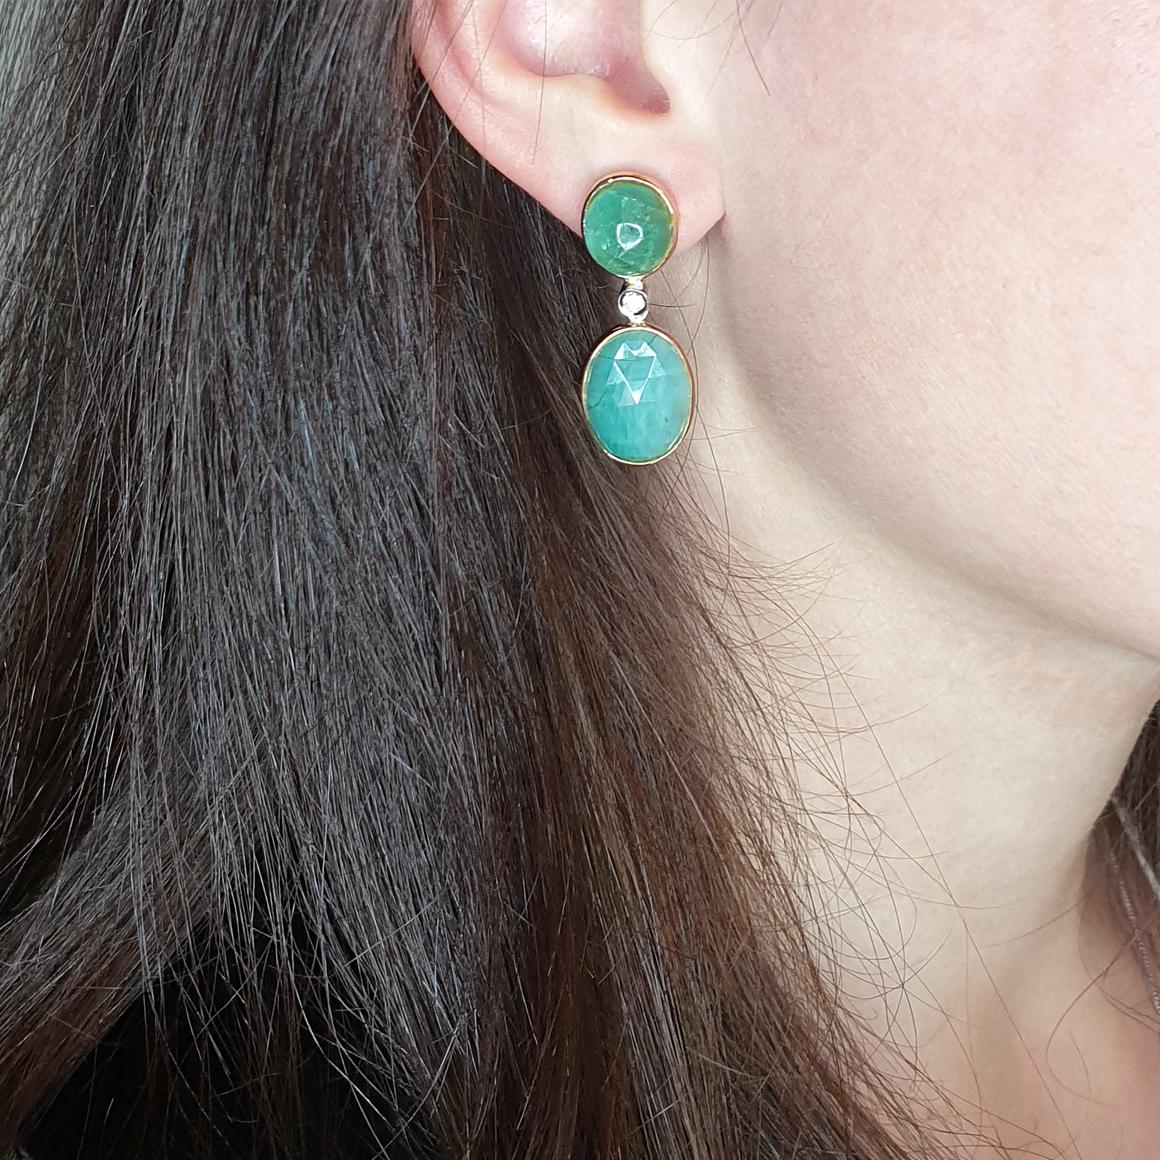  
Shiny and light Emeralds , design and craftmanship handmade in Italy by Stanoppi Jewellery since 1948.
Earrings in 18k rose and white gold with emerald  (oval cabochon cut, size: 10x11mm) and   ( emerald root : 12x16mm) and white Diamonds cts 0,06